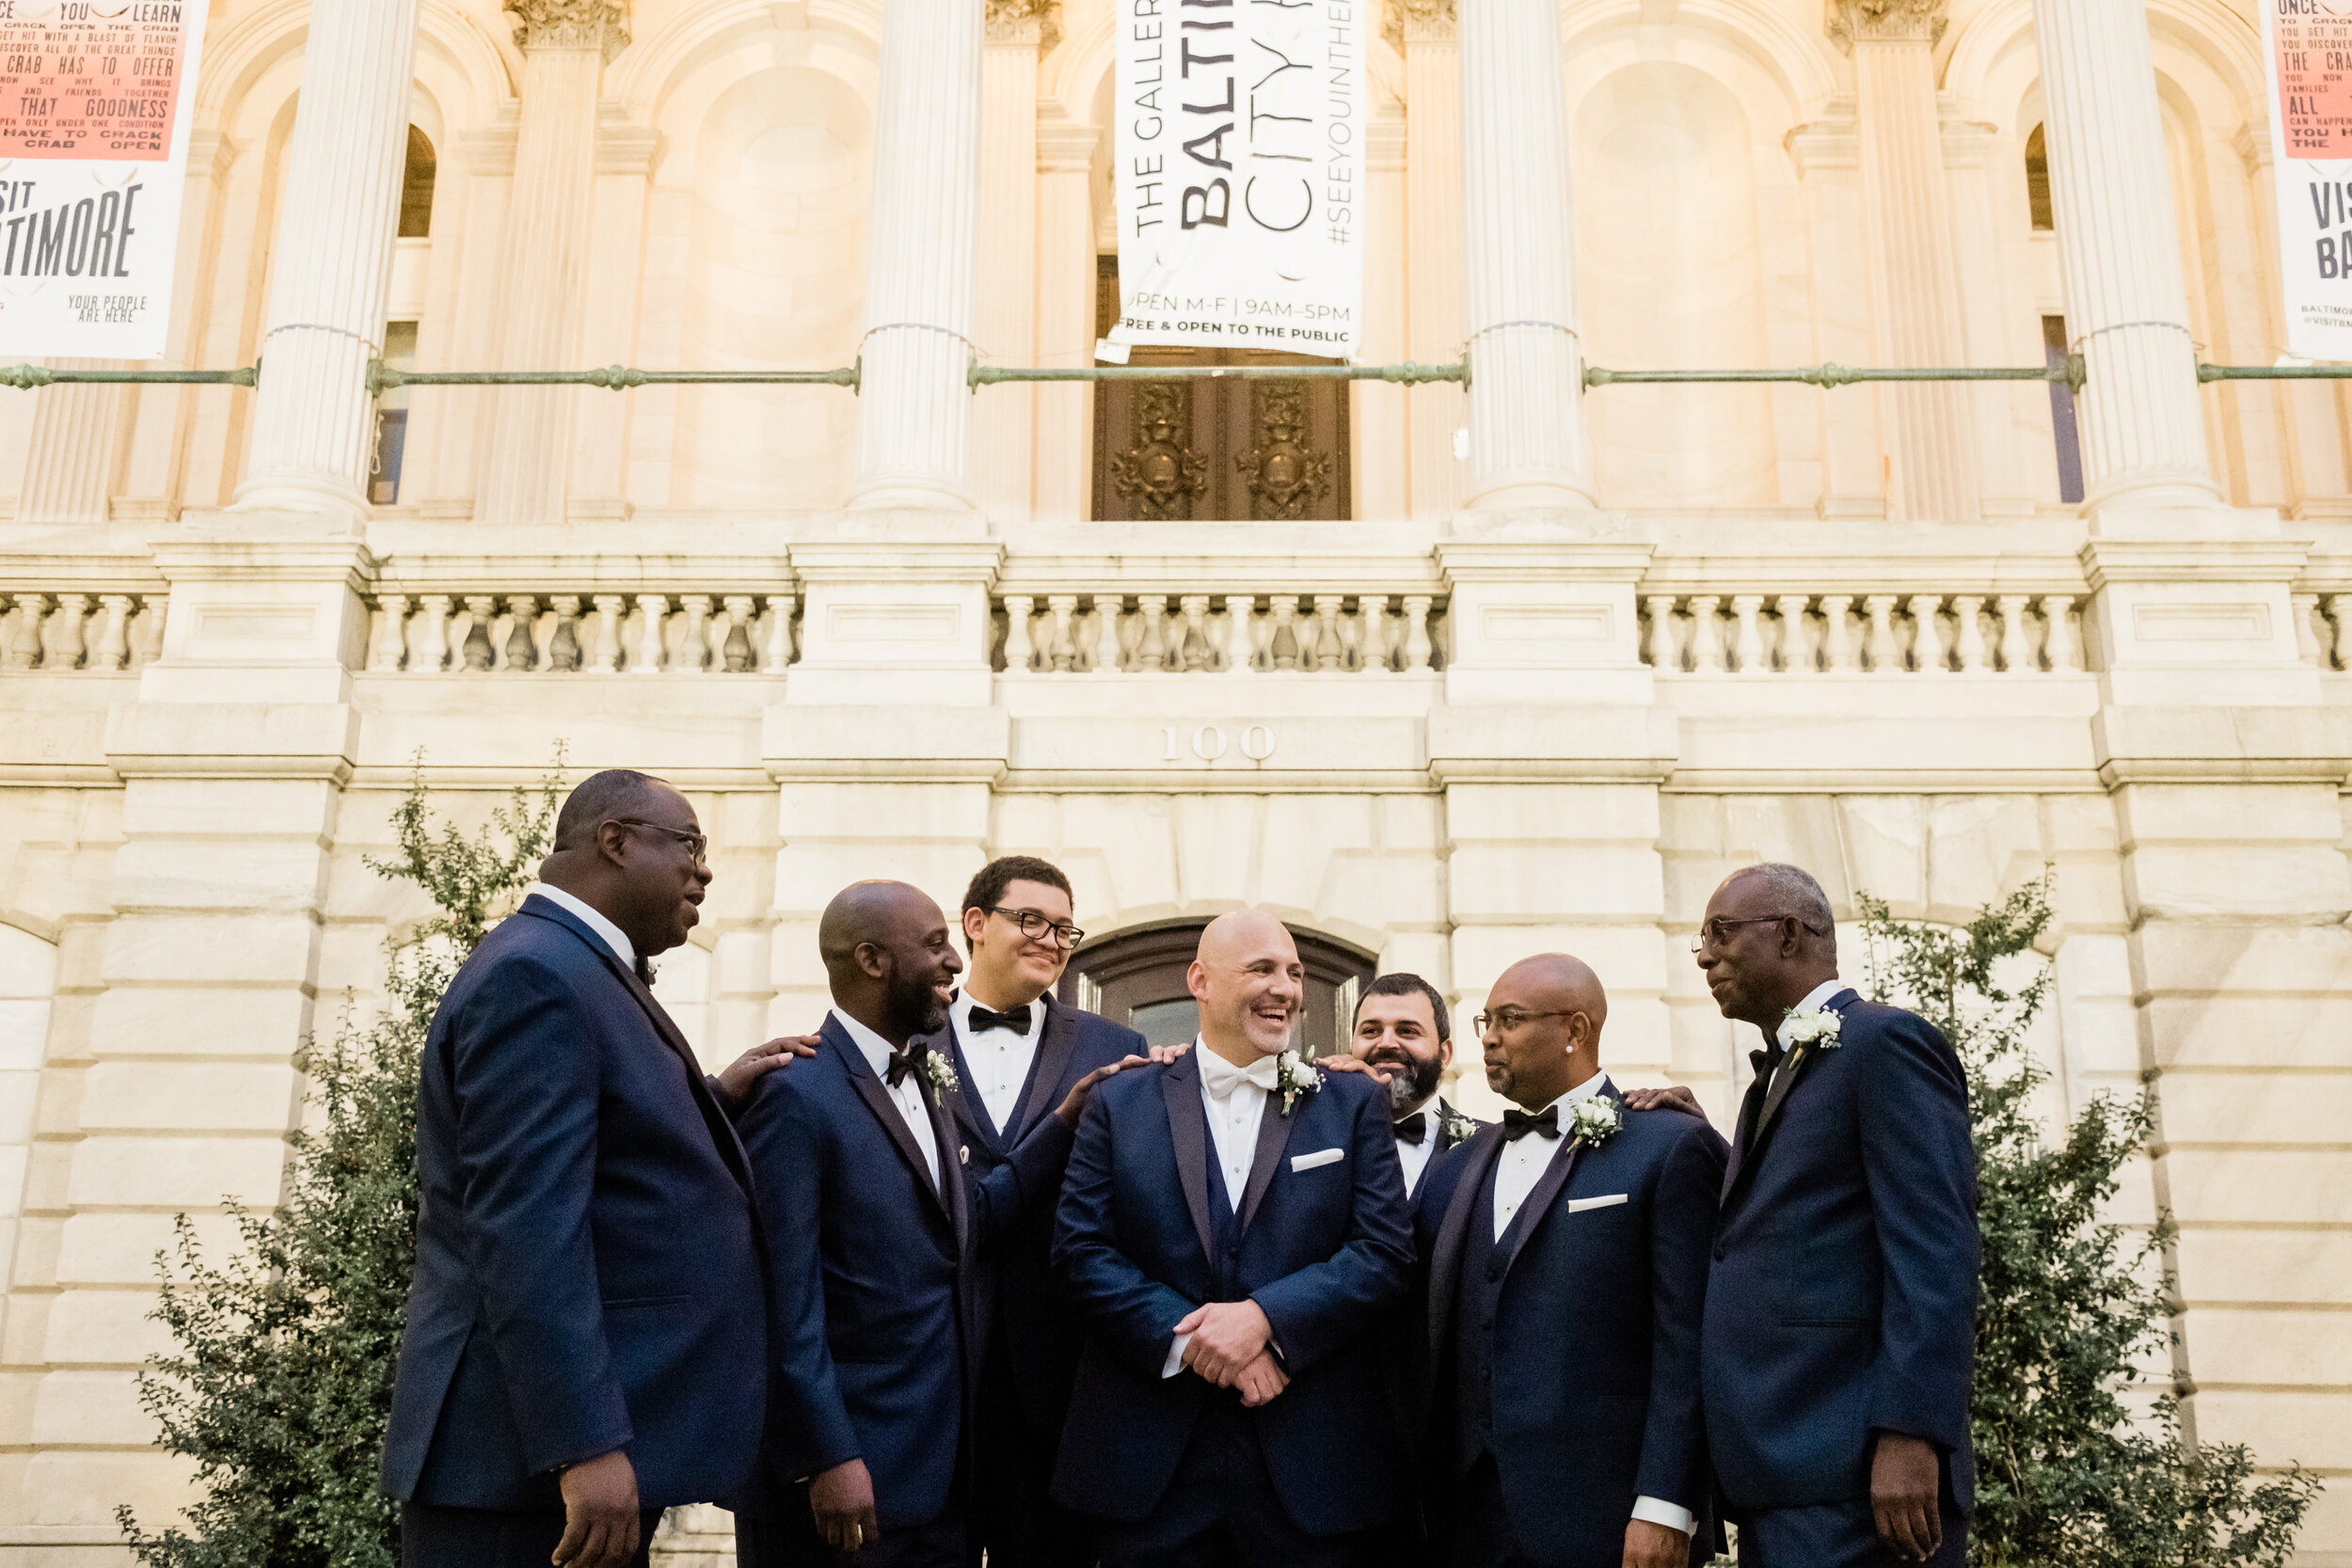 get married in baltimore city hall shot by megapixels media biracial couple wedding photographers maryland-35.jpg